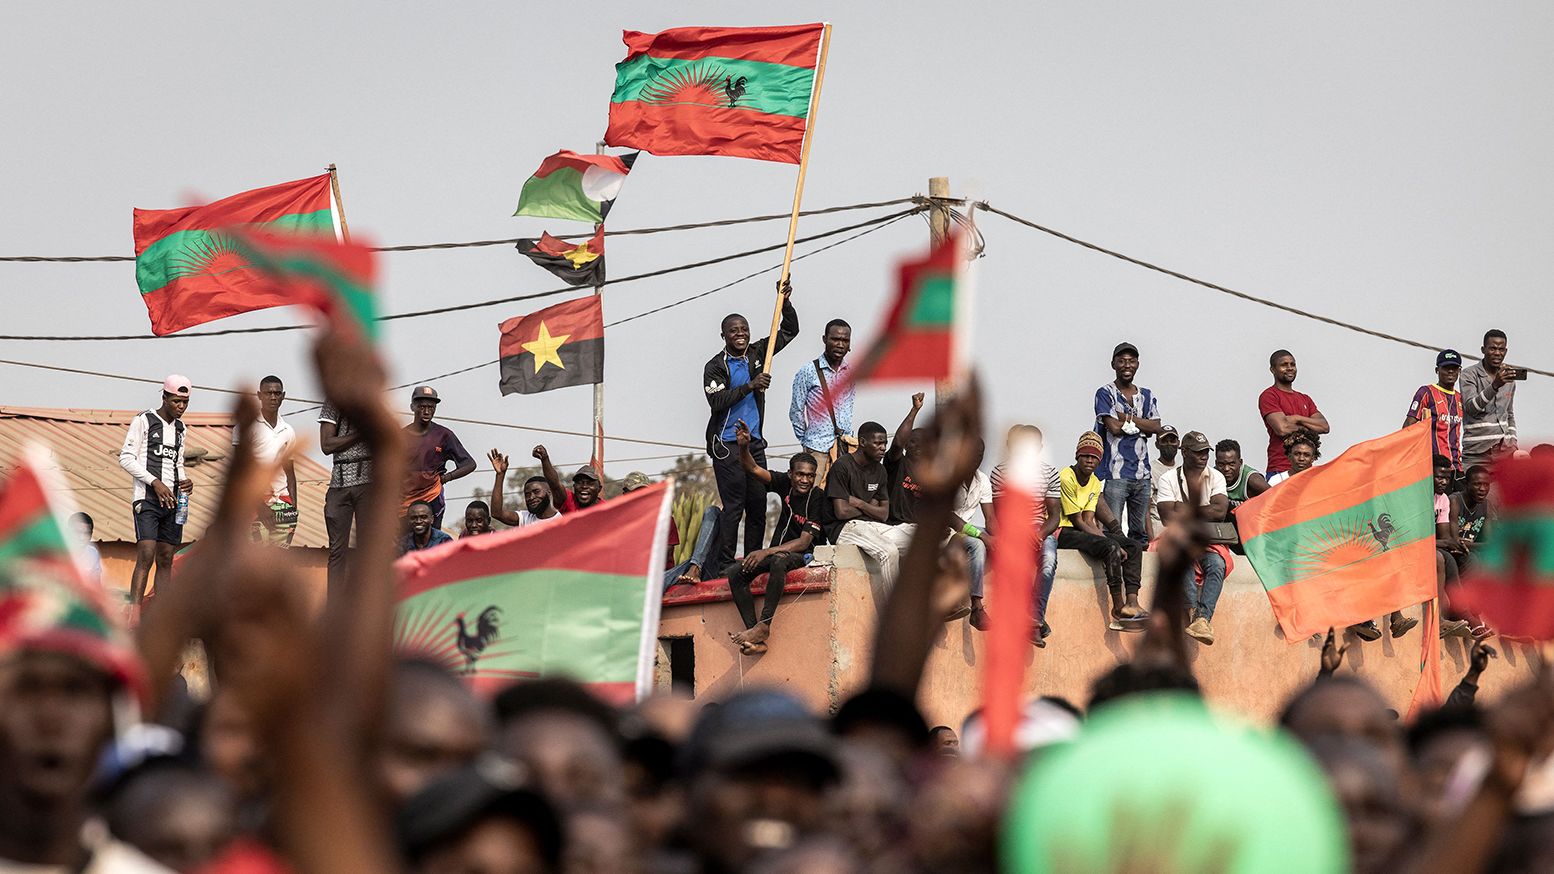 Supporters of Angolan opposition party UNITA wave party flags during a campaign rally. 